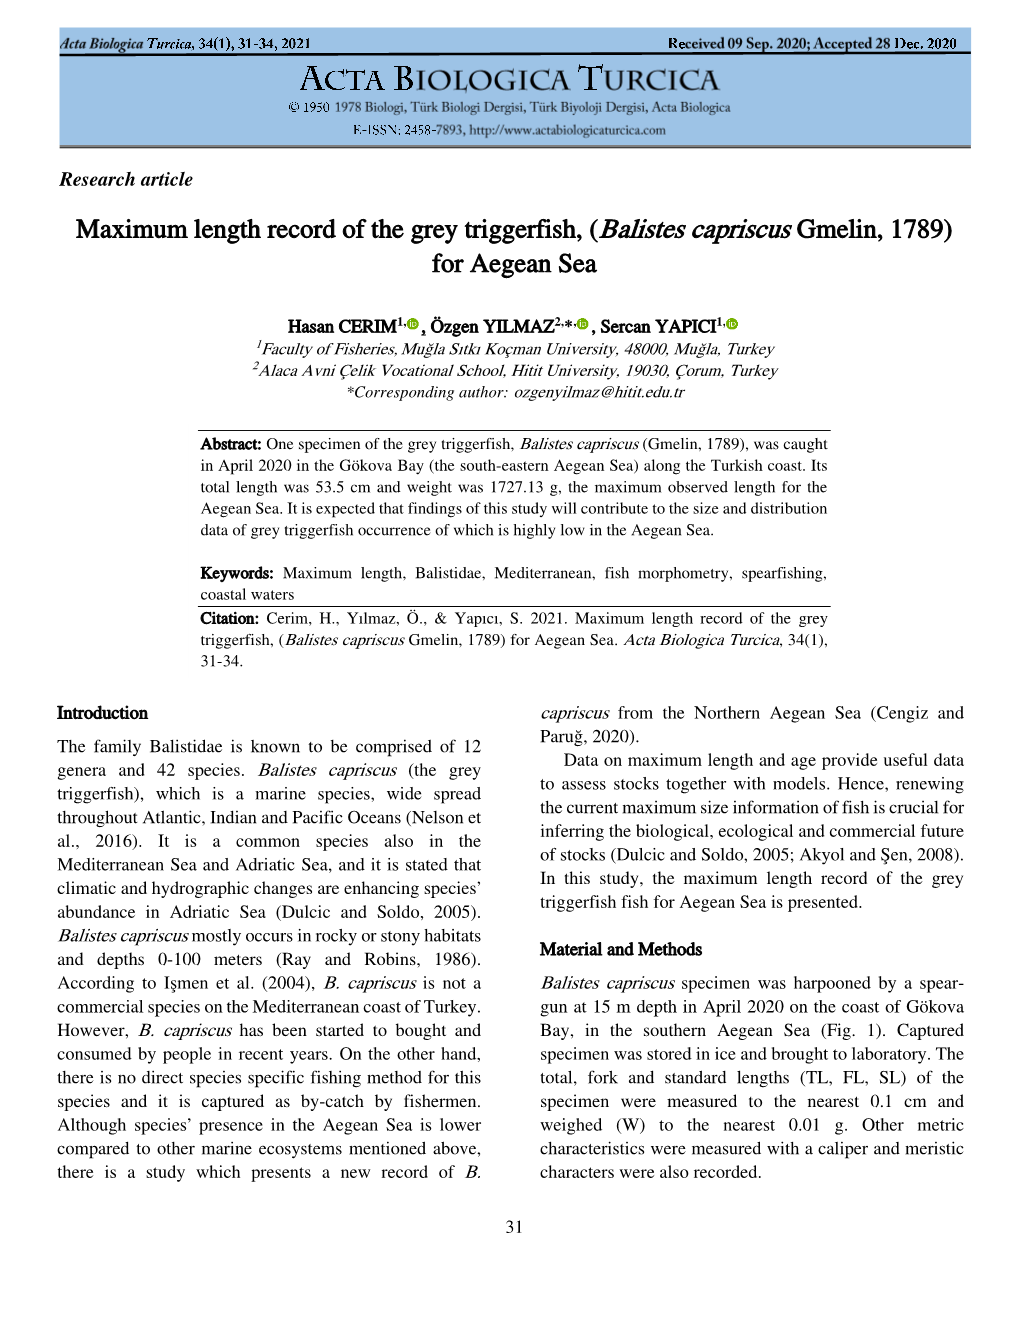 Maximum Length Record of the Grey Triggerfish, (Balistes Capriscus Gmelin, 1789) for Aegean Sea